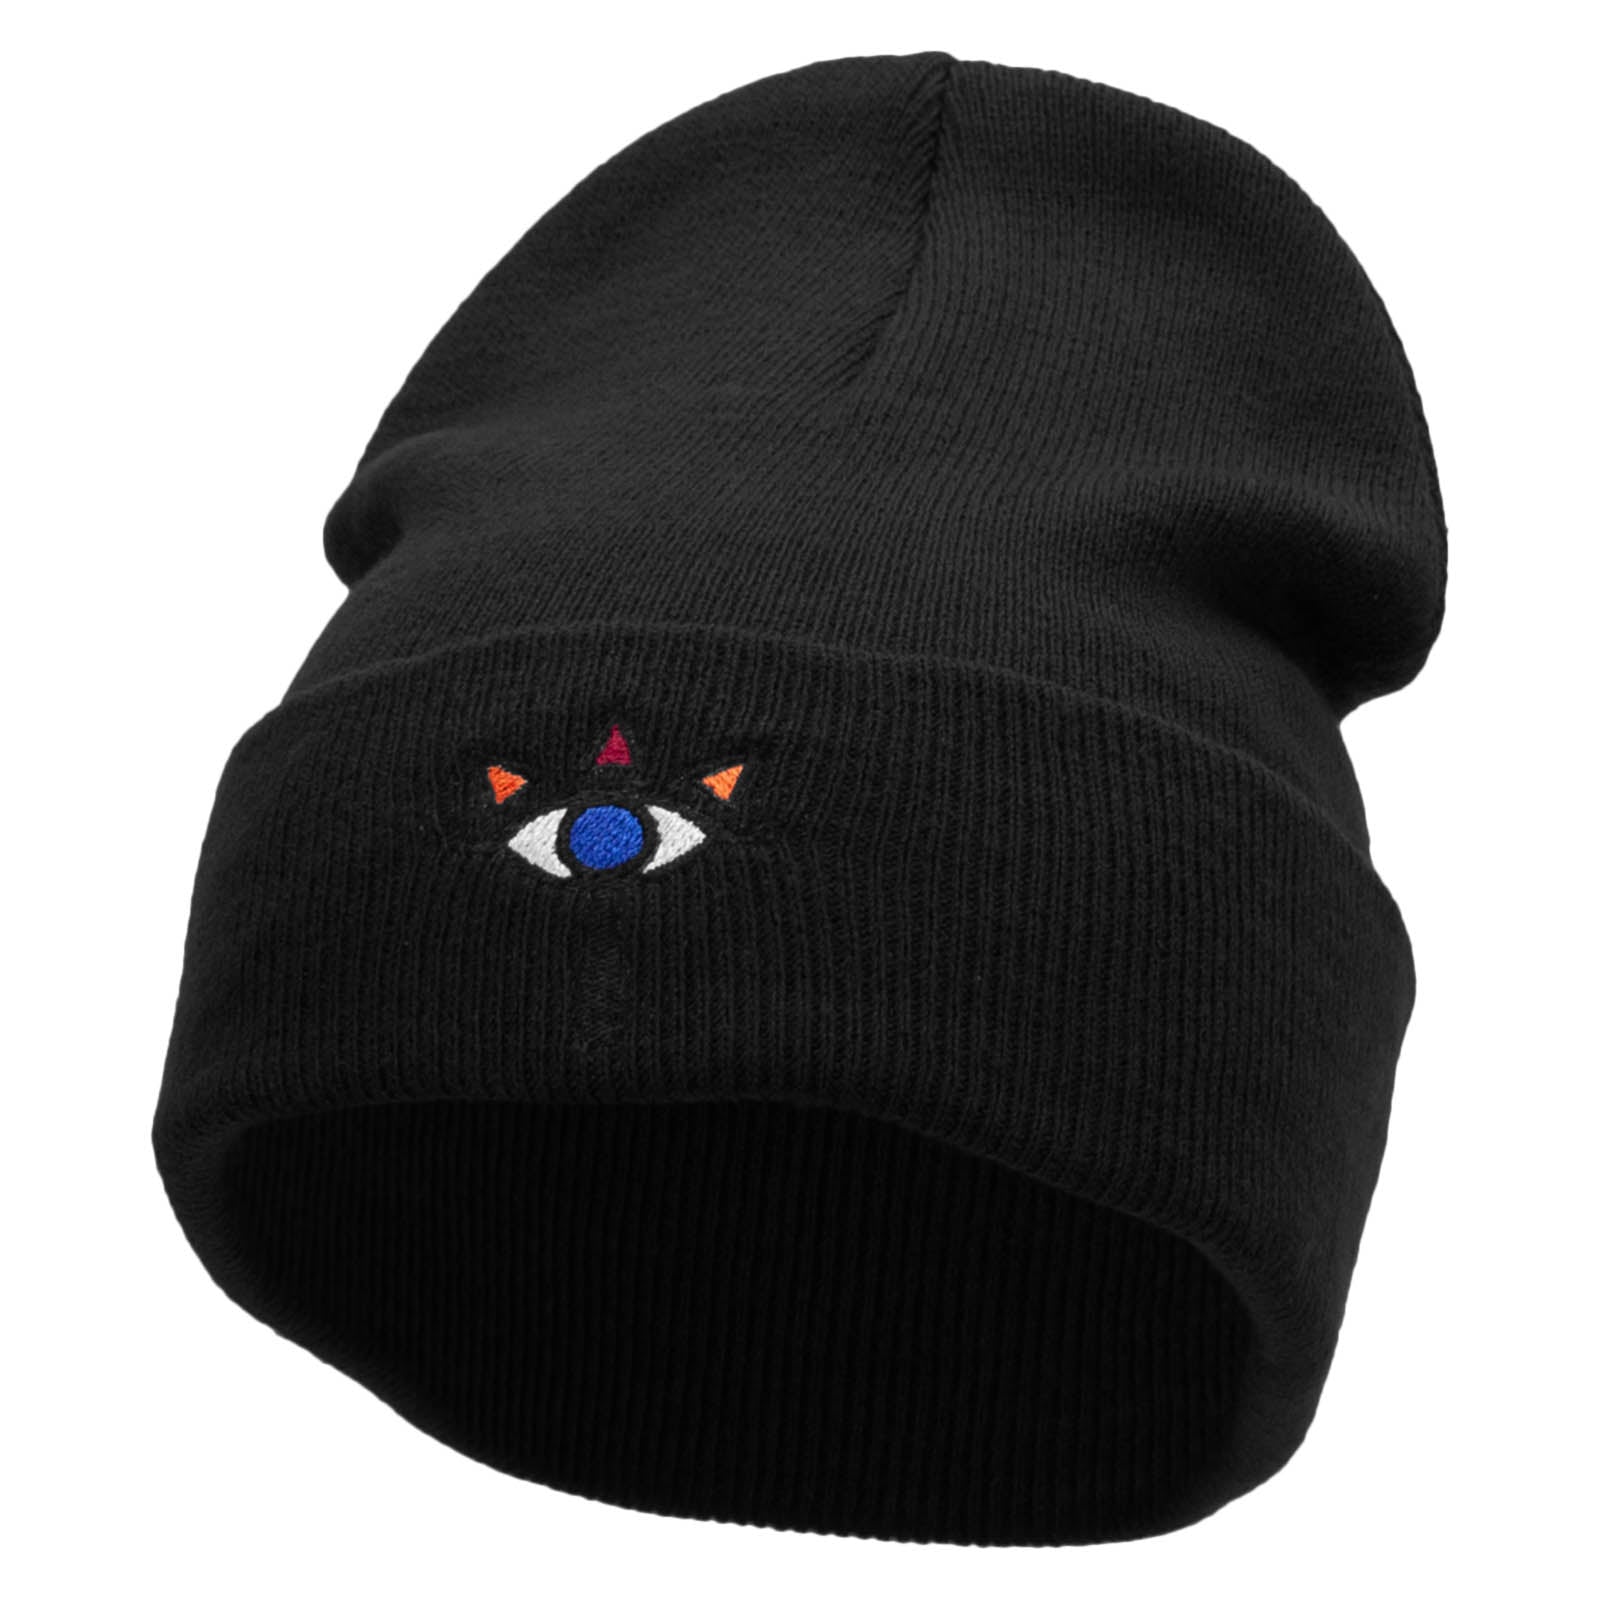 Eye Crest Embroidered 12 Inch Long Knitted Beanie - Black OSFM